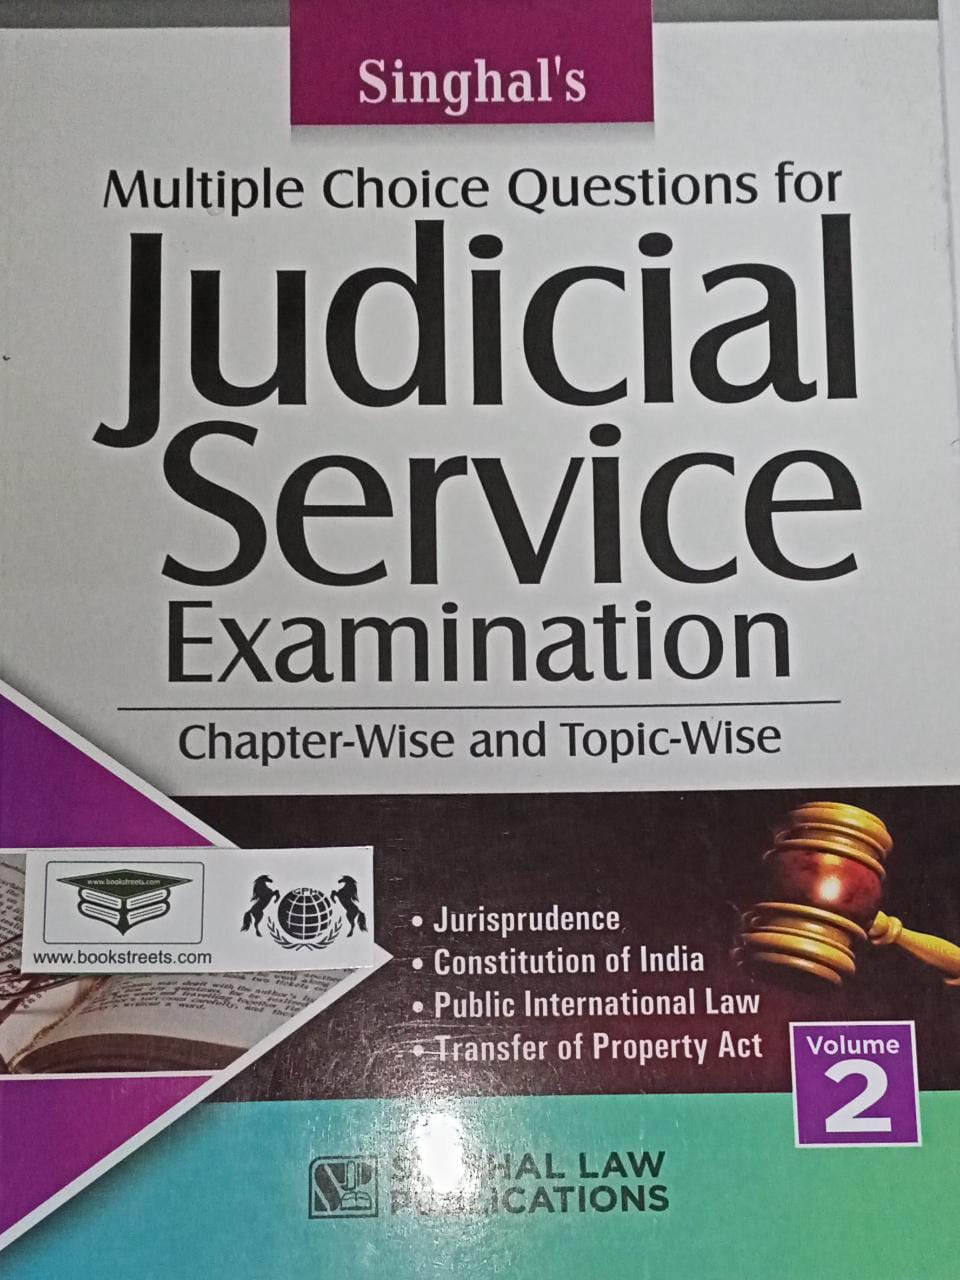 Singhal's Multiple Choice Question for Judicial Service Examination Chapter-wise and Topic wise Volume-2 by Singhal Law Publications